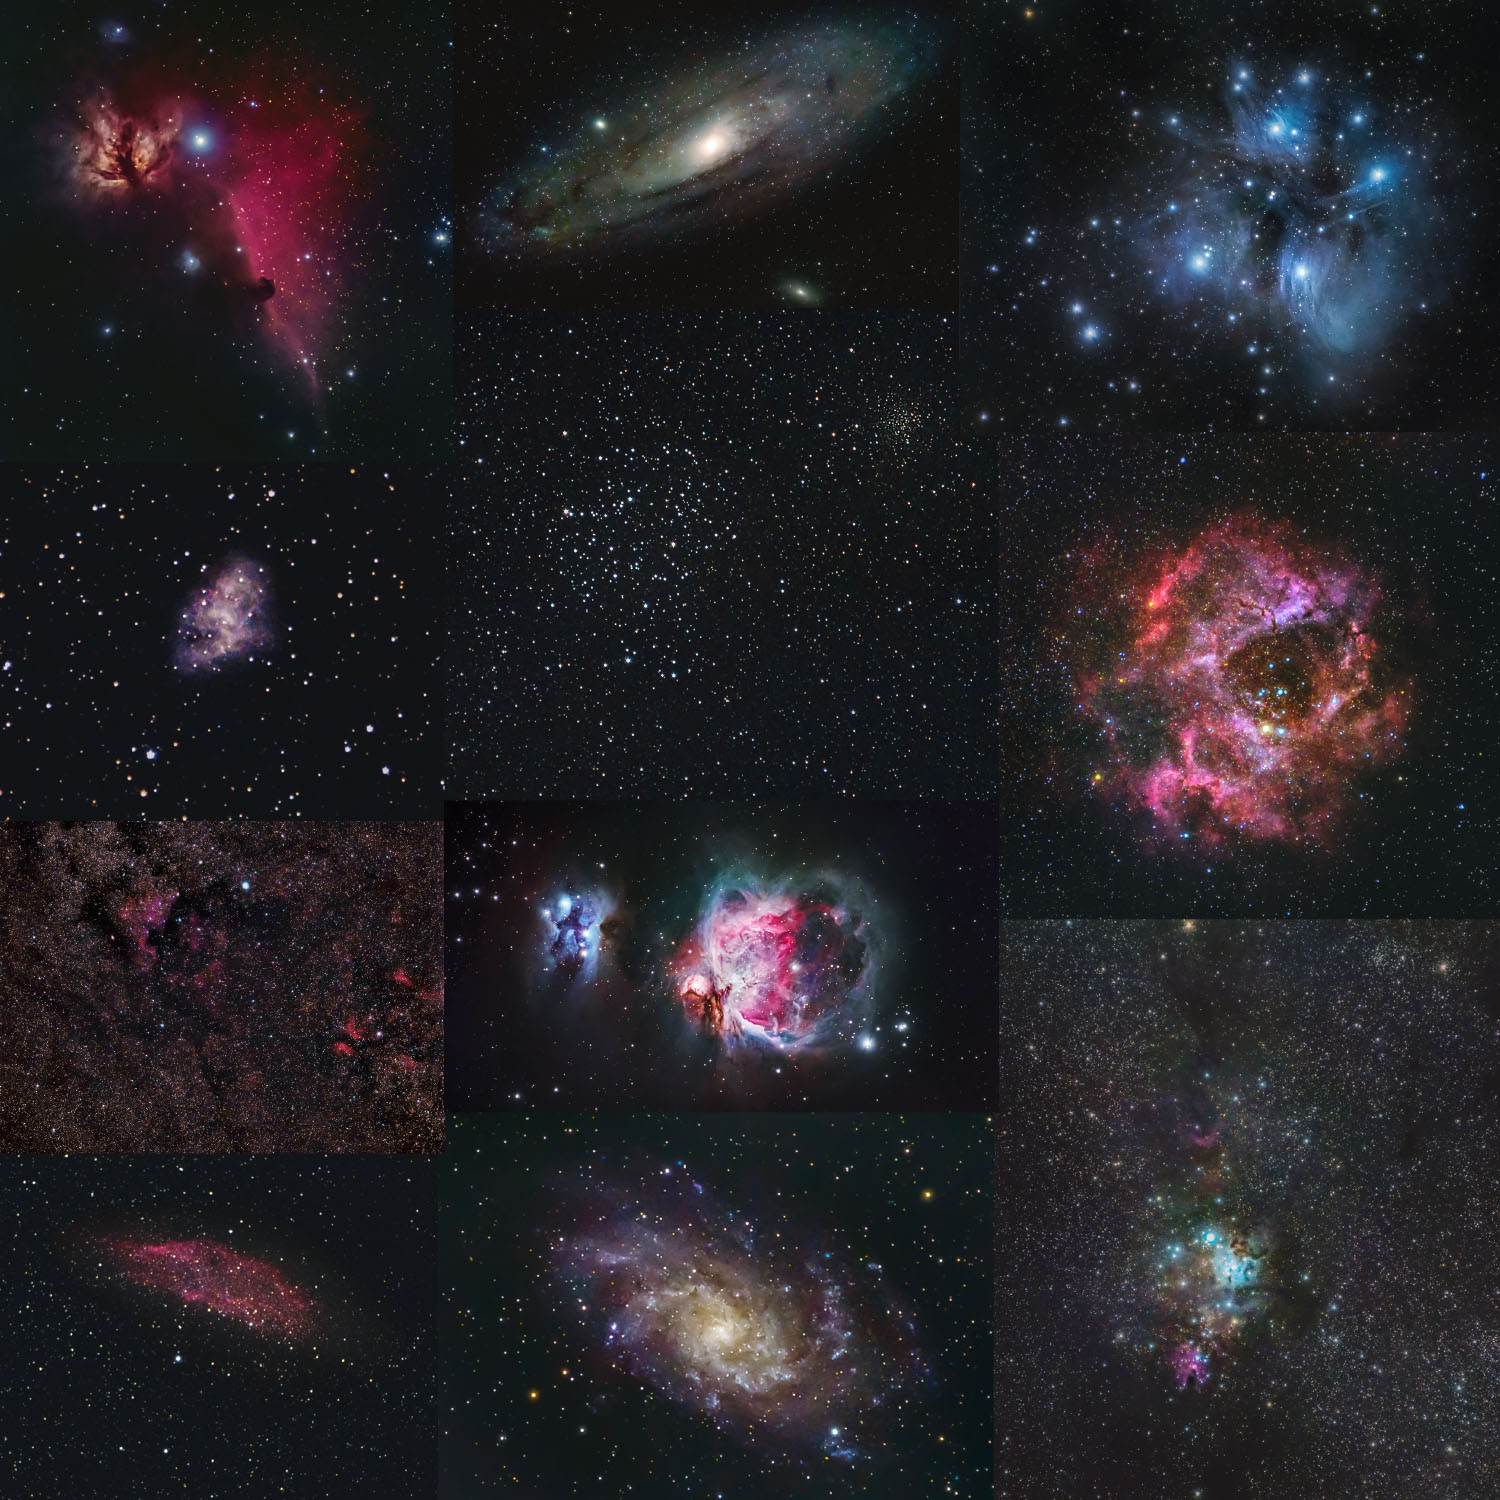 AstroPhotoCollage2021